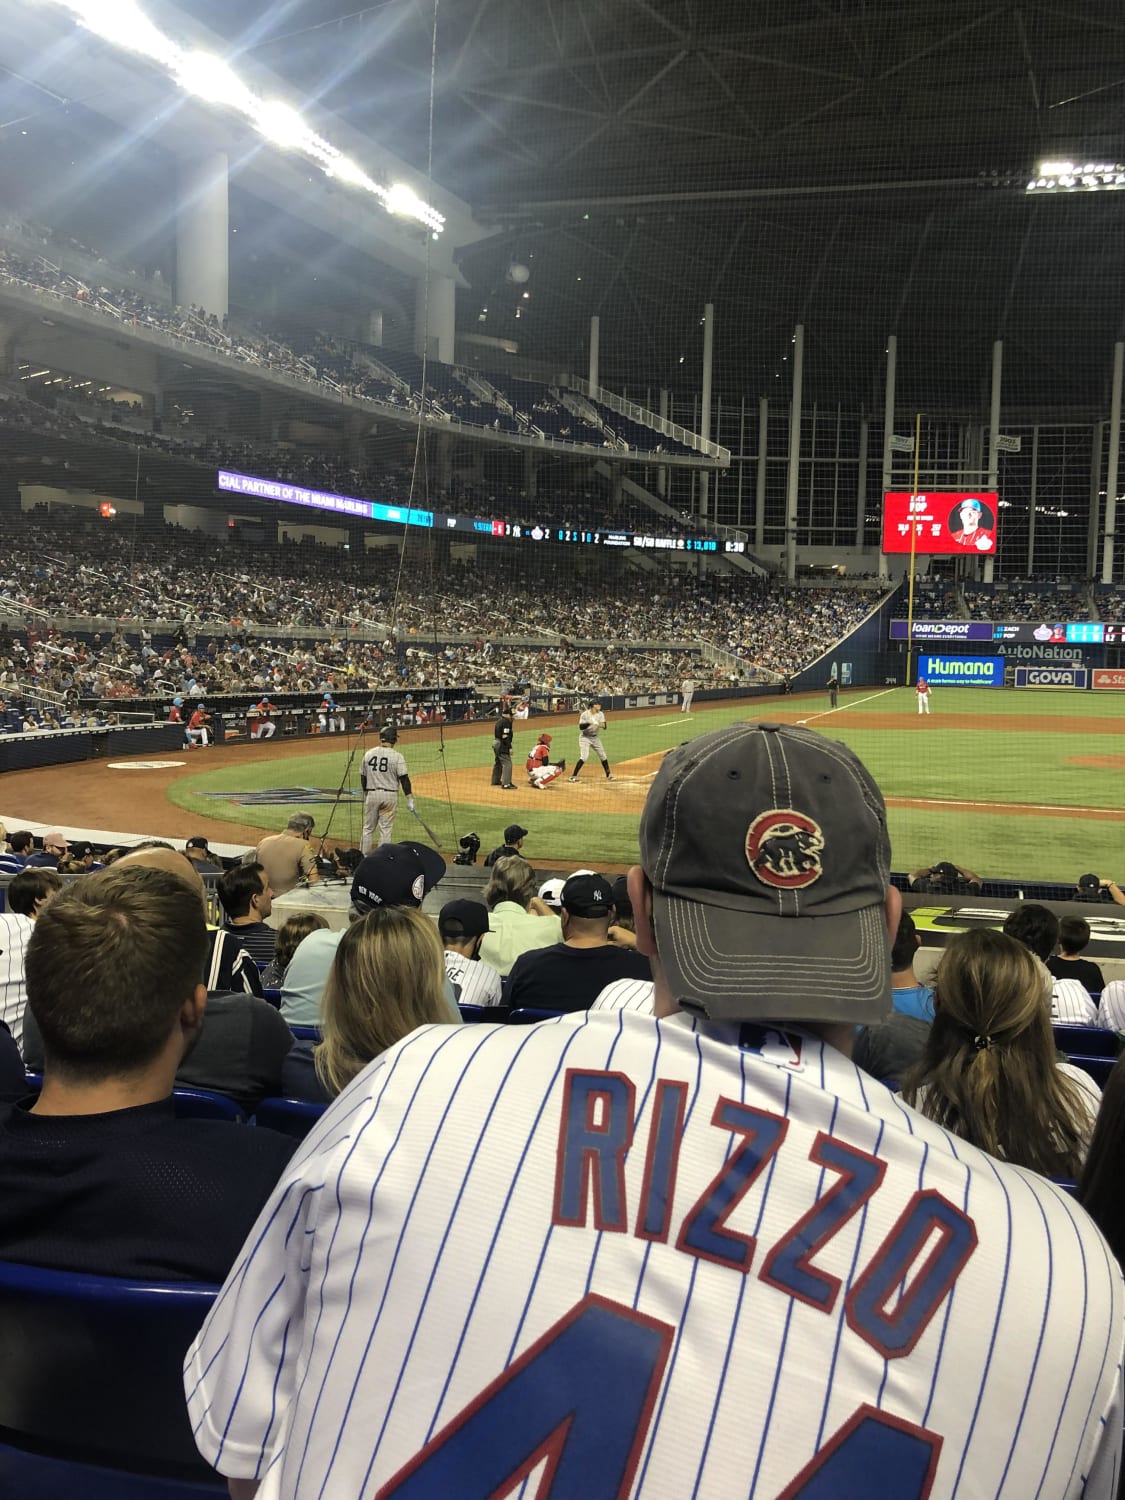 Just a Rizzo fan at the Yankees Marlins game for his 2nd debut. Warm up right before his home run!